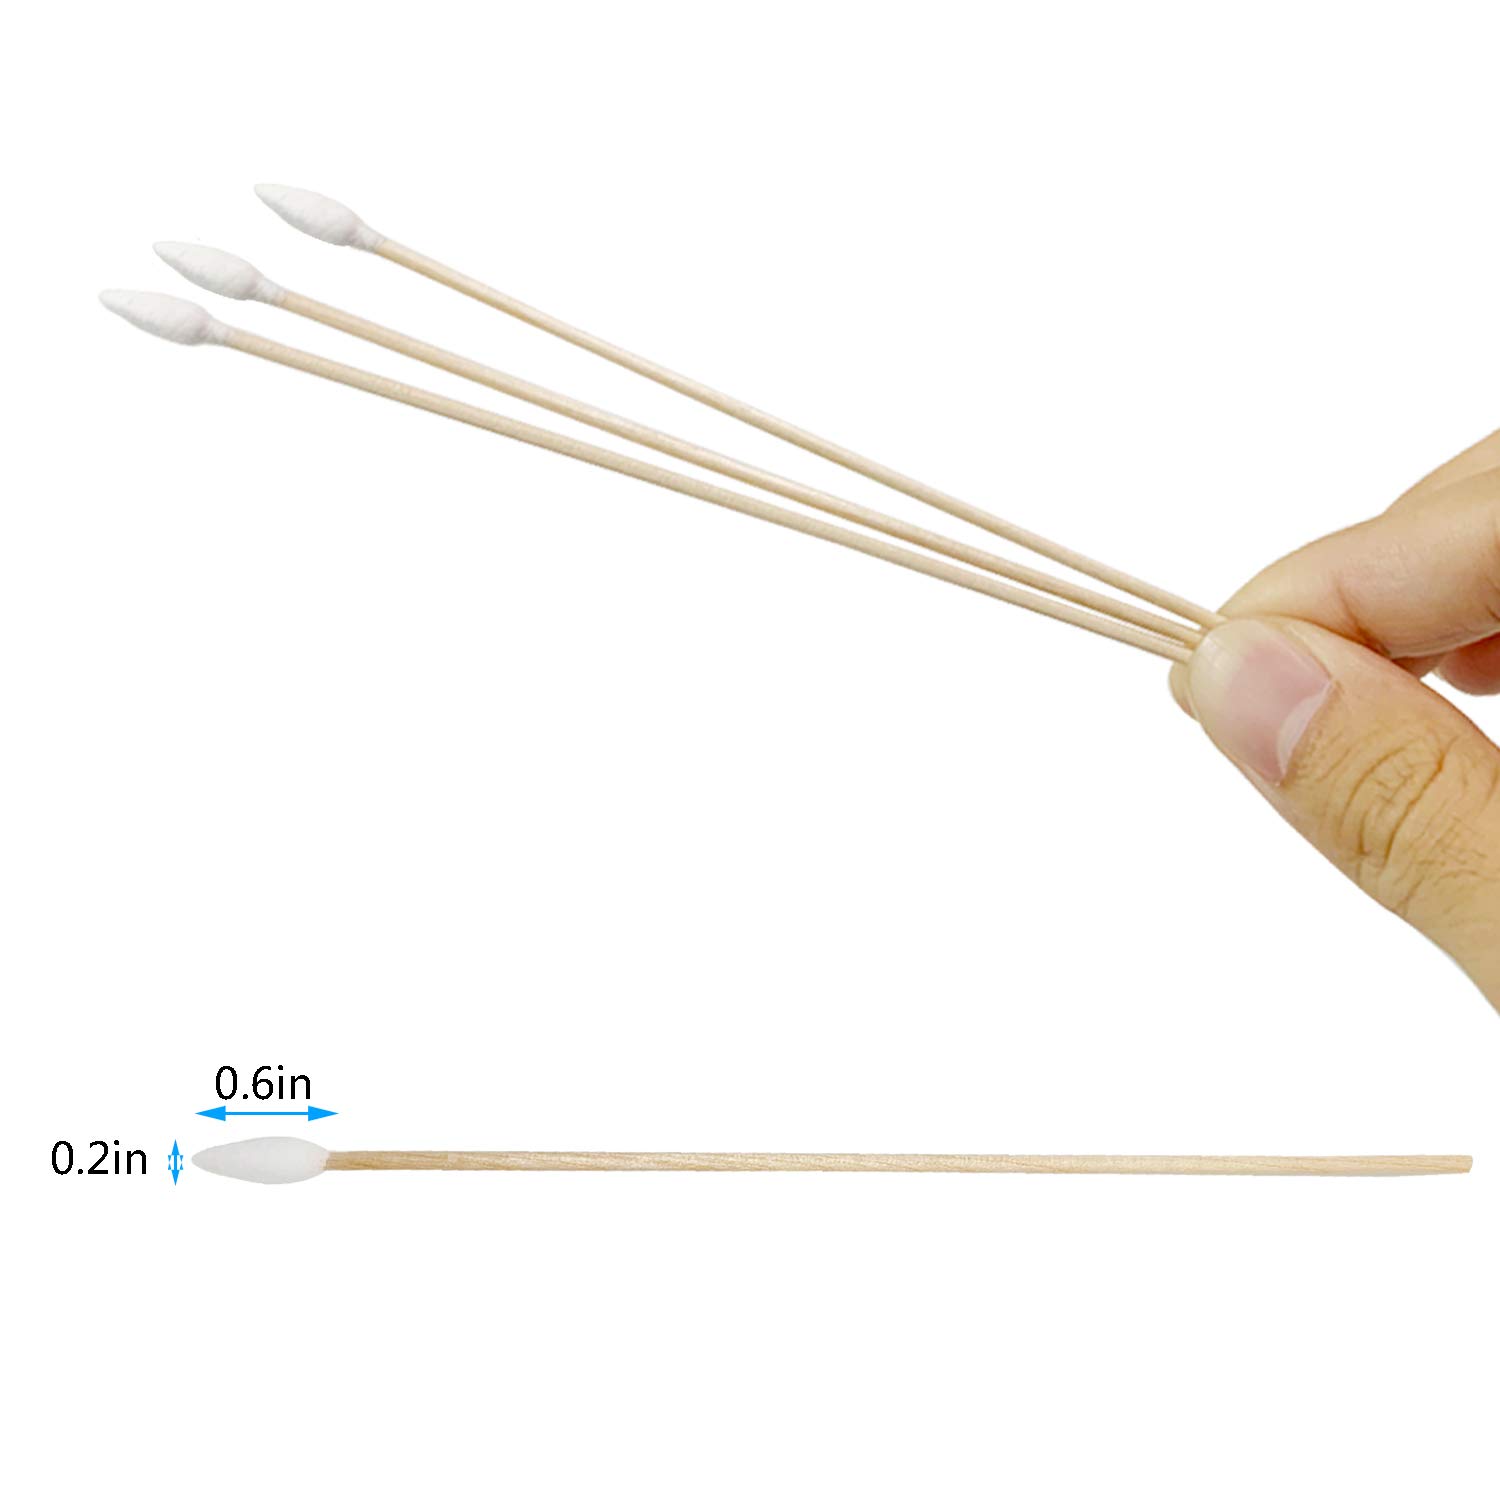 400pcs Precision Cotton Swabs with 6'' Long Sticks for Gun Cleaning, Makeup or Pets